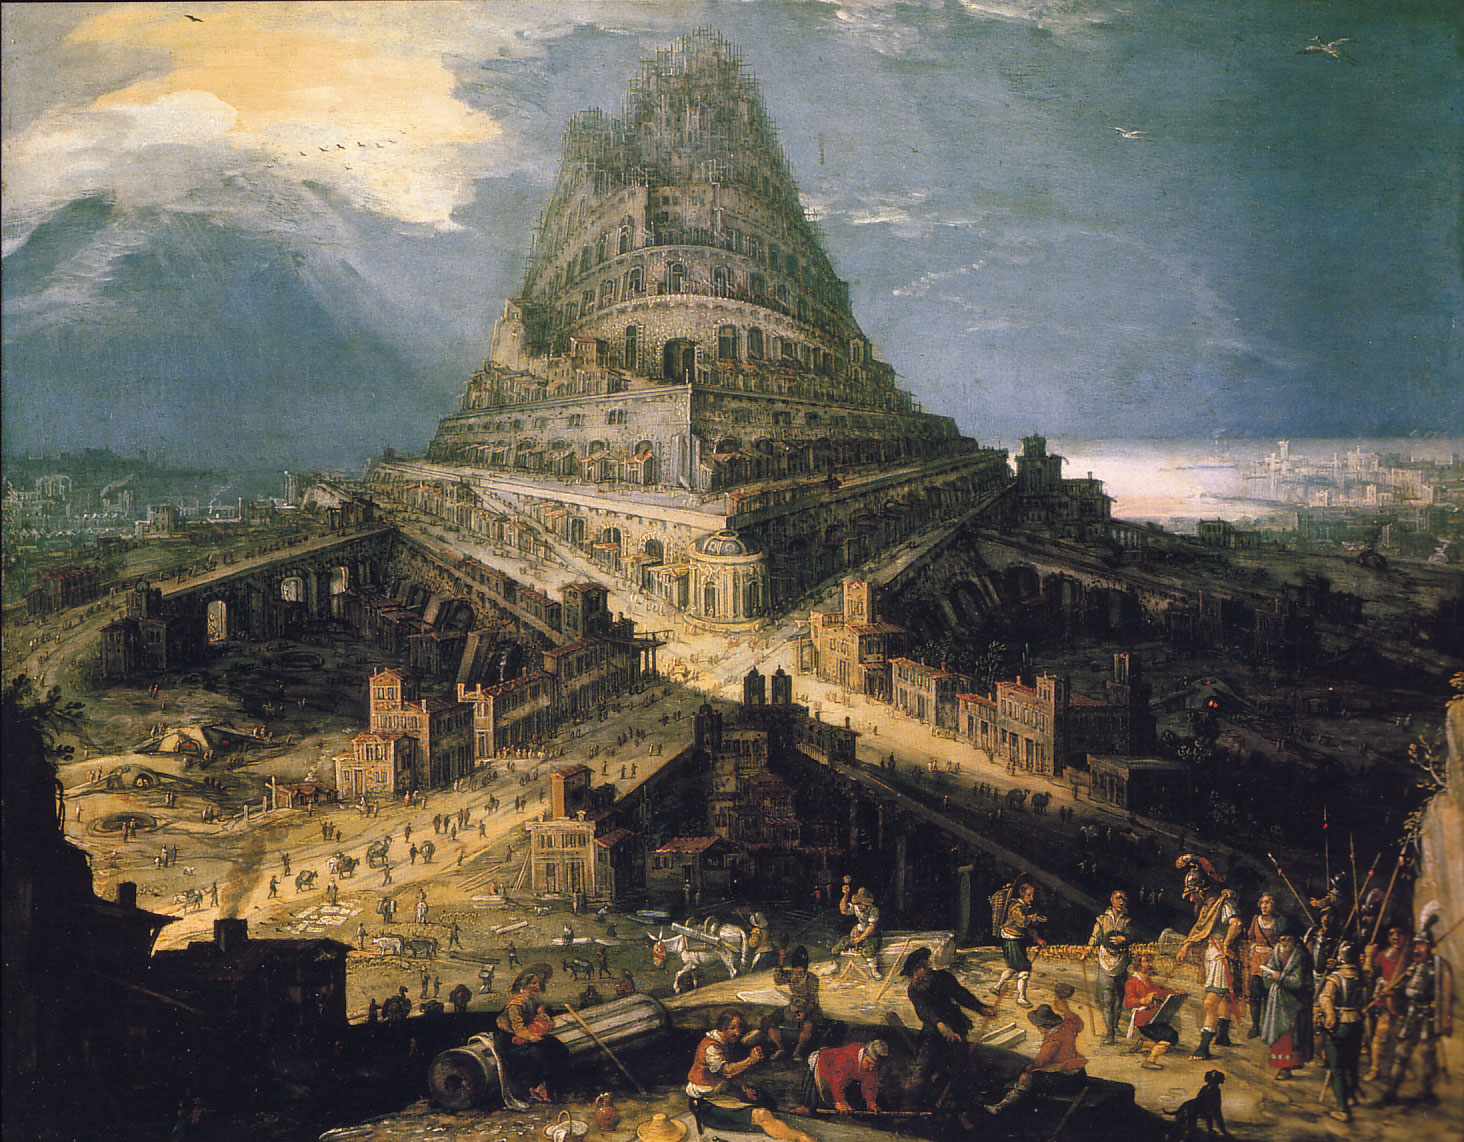 Figure 1: The Tower of Babel. This particular work was painted by Hendrick van Cleve III in the 16th century